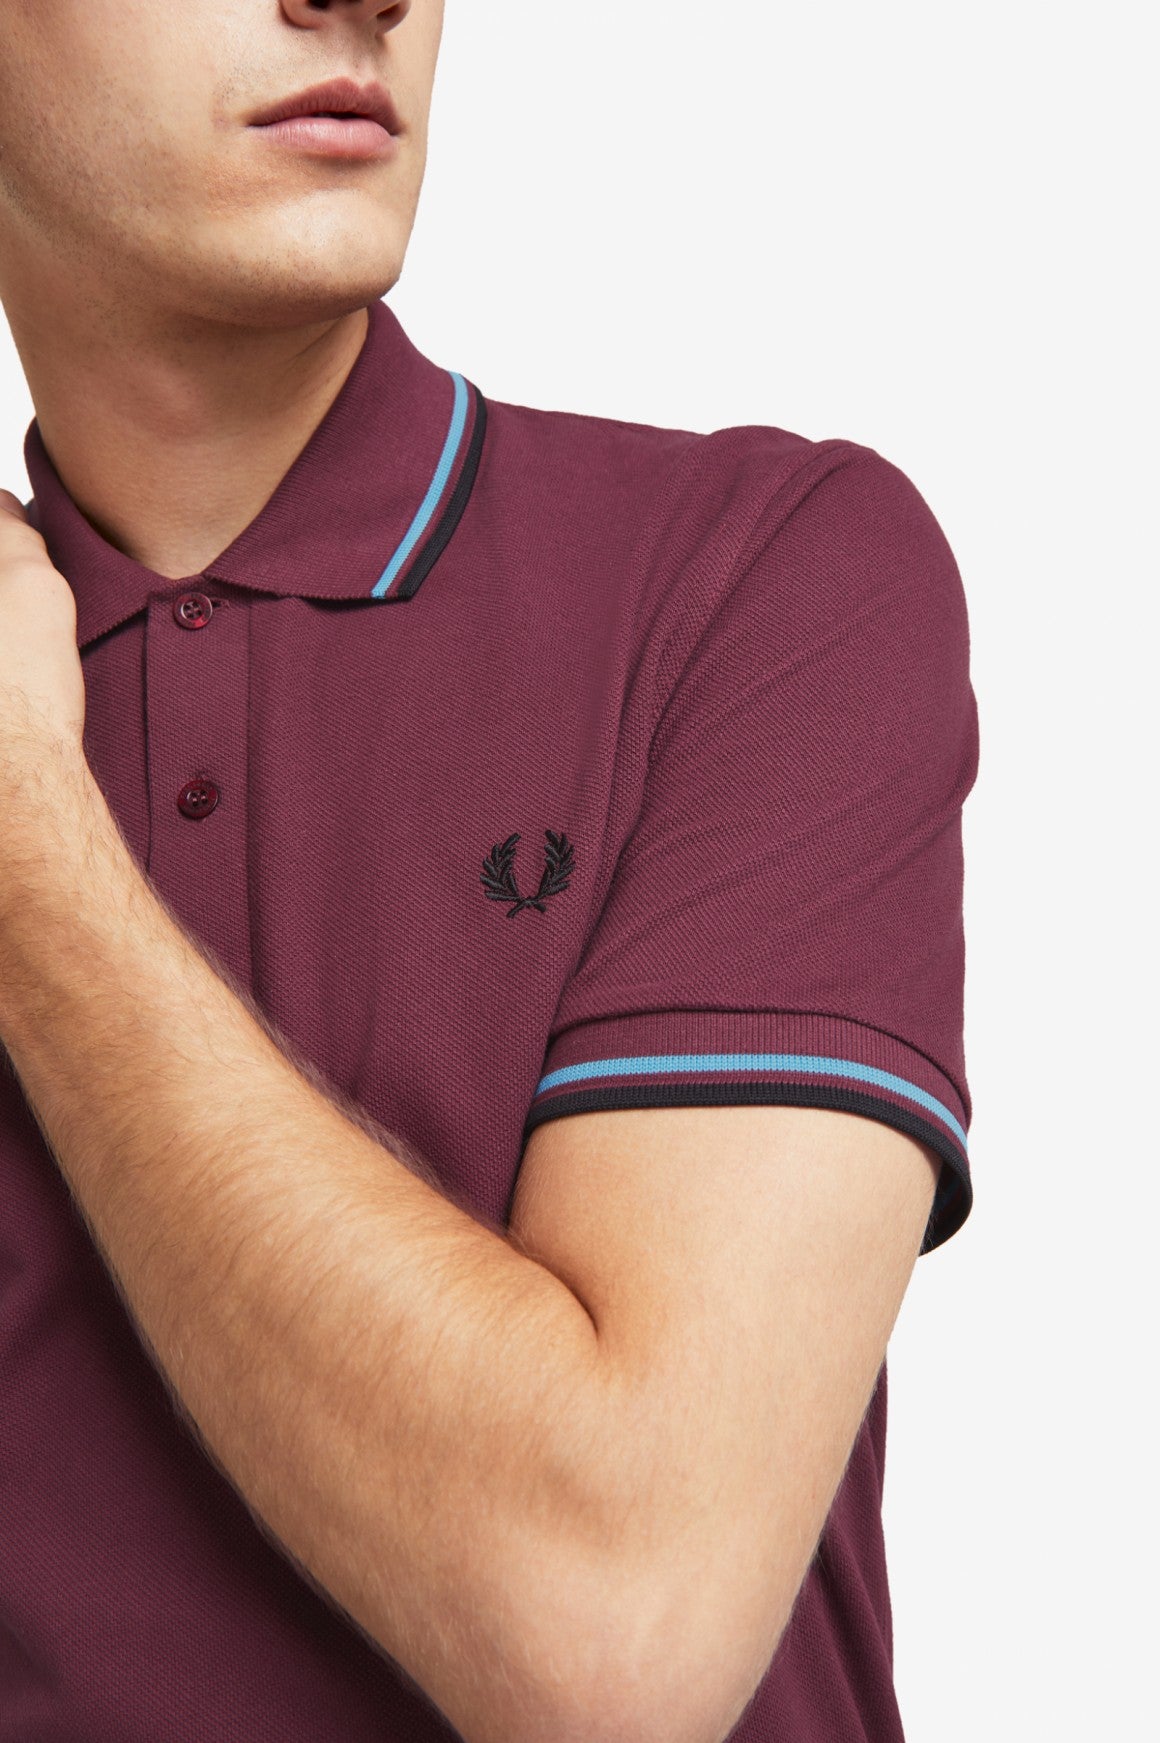 TWIN TIPPED FRED PERRY SHIRT MADE IN ENGLAND